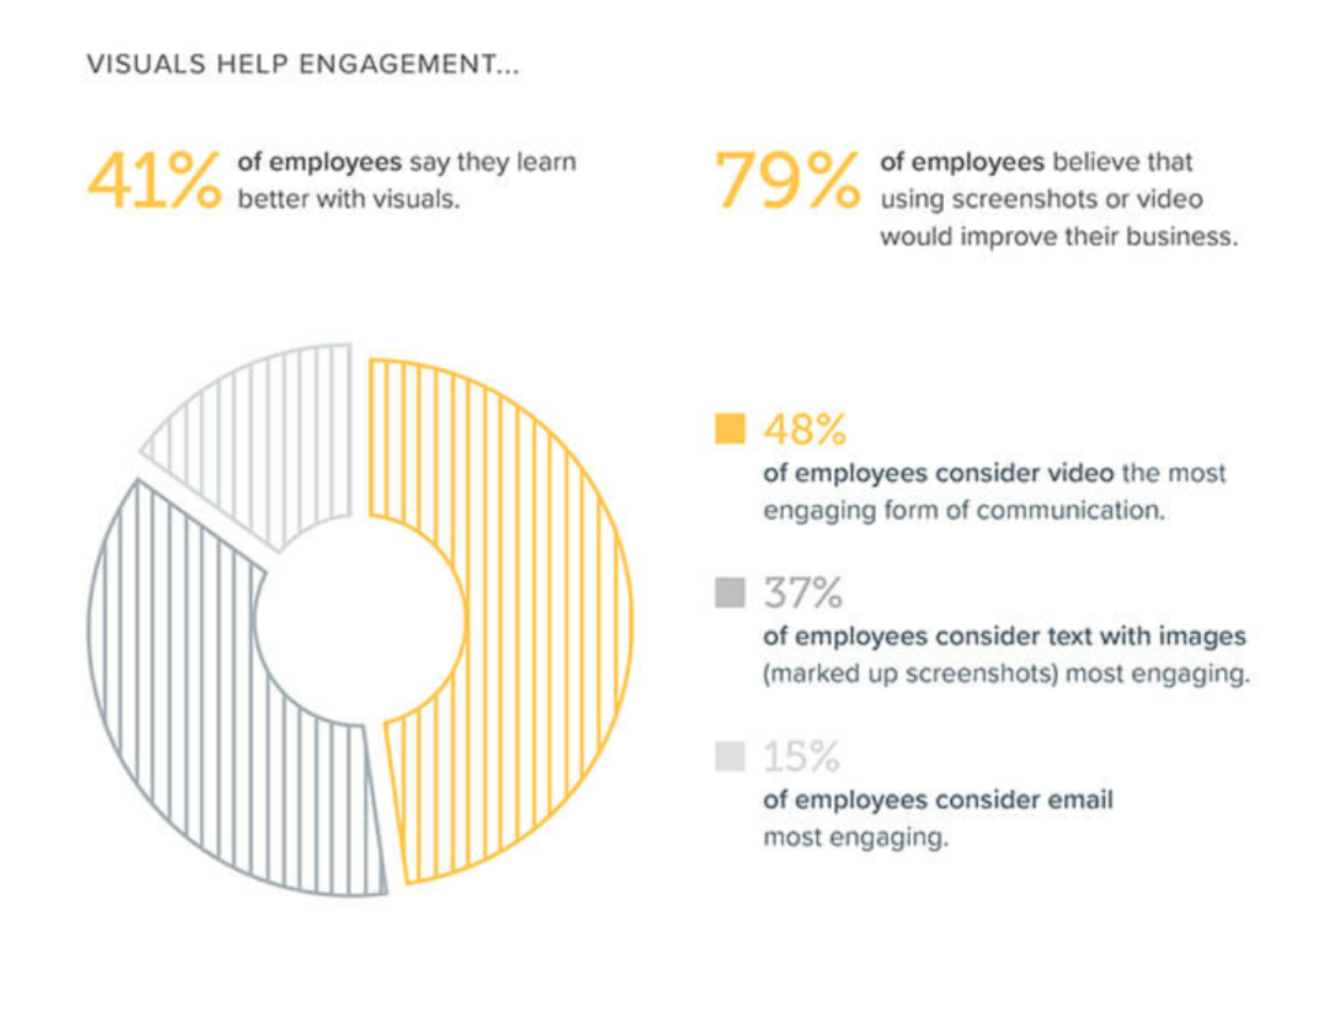 An image for the blog post about using video for internal communications. This infographic shows some statistics about the importance of visuals according to employees.